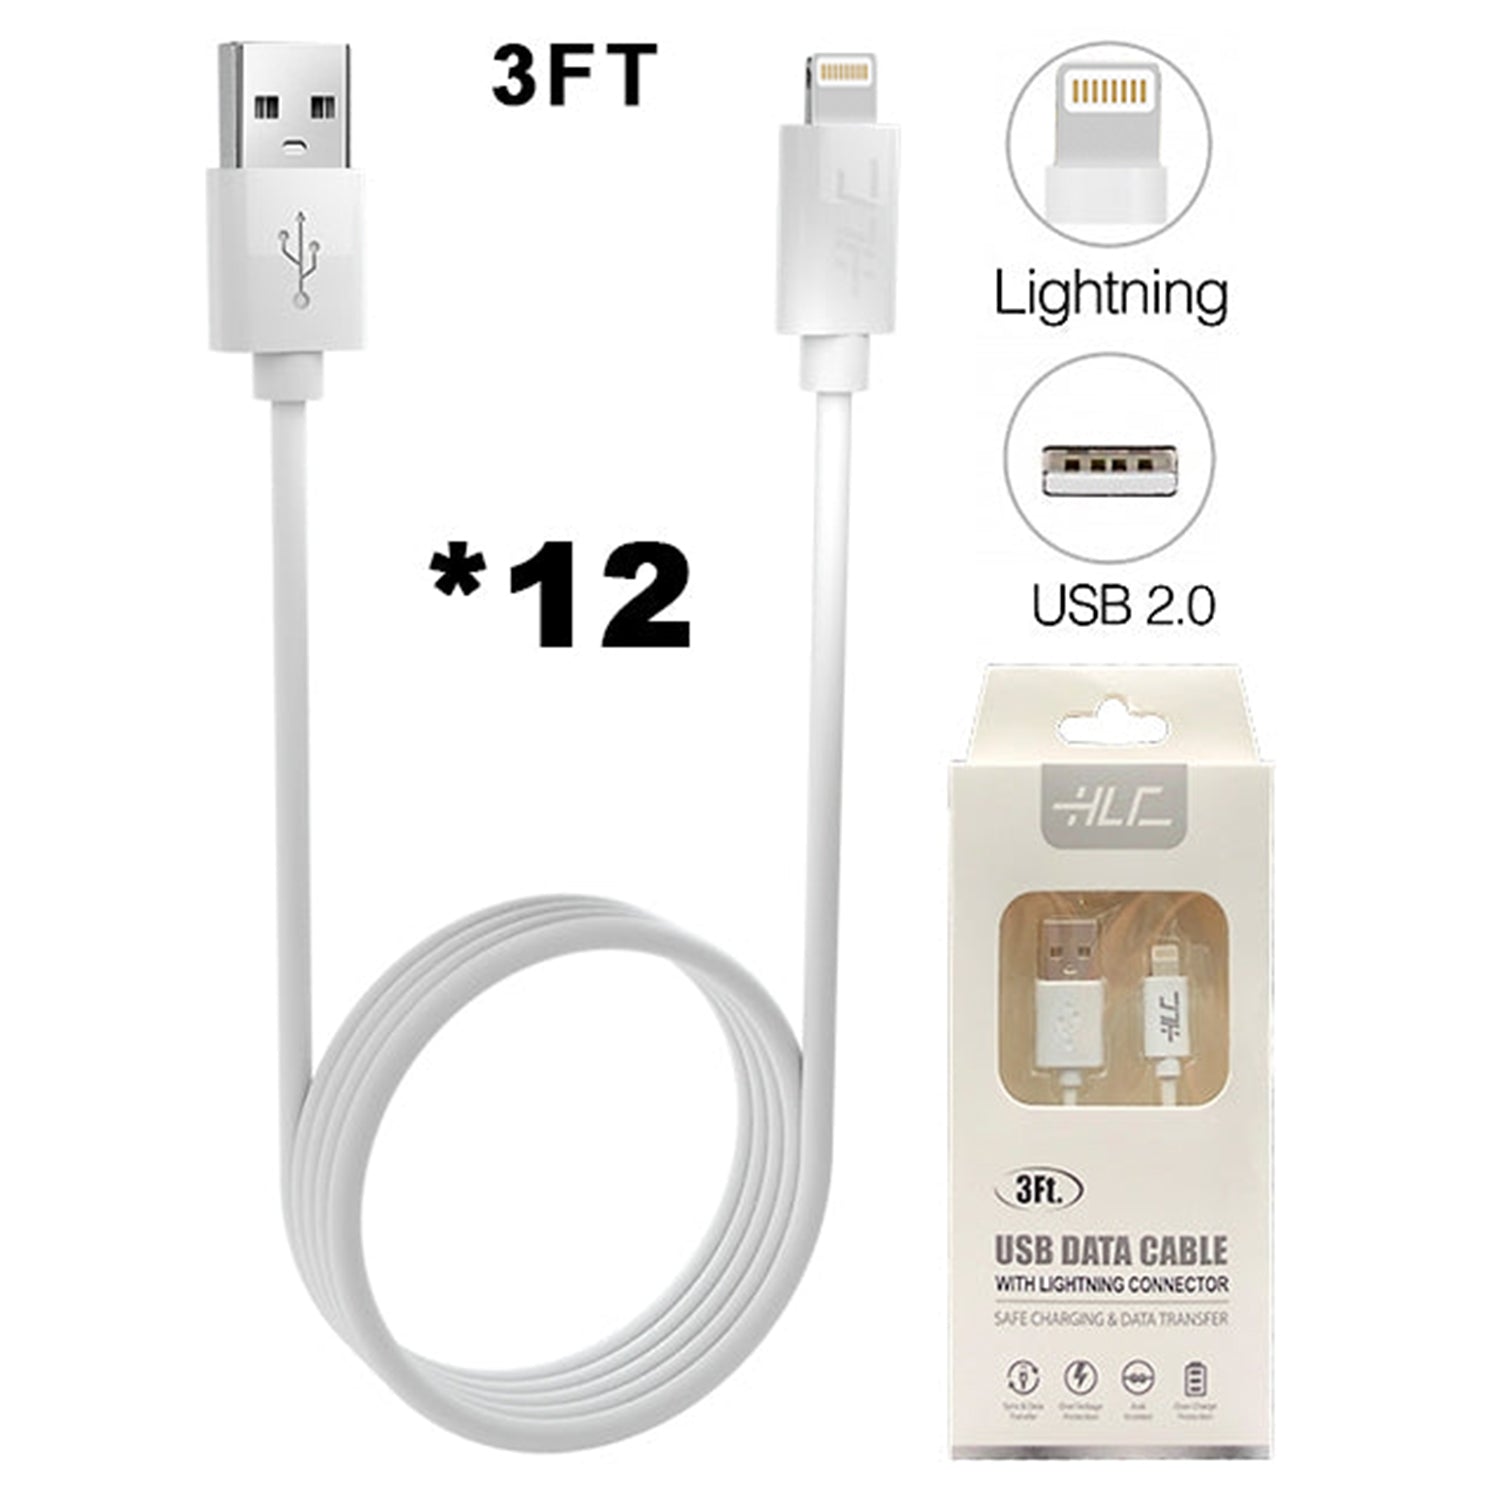 A Dozen of Lightning USB Cable for iPhone 11/11 Pro /11 Pro Max/ Xs Max/ X / XS/ 8 / 7 (3FT)